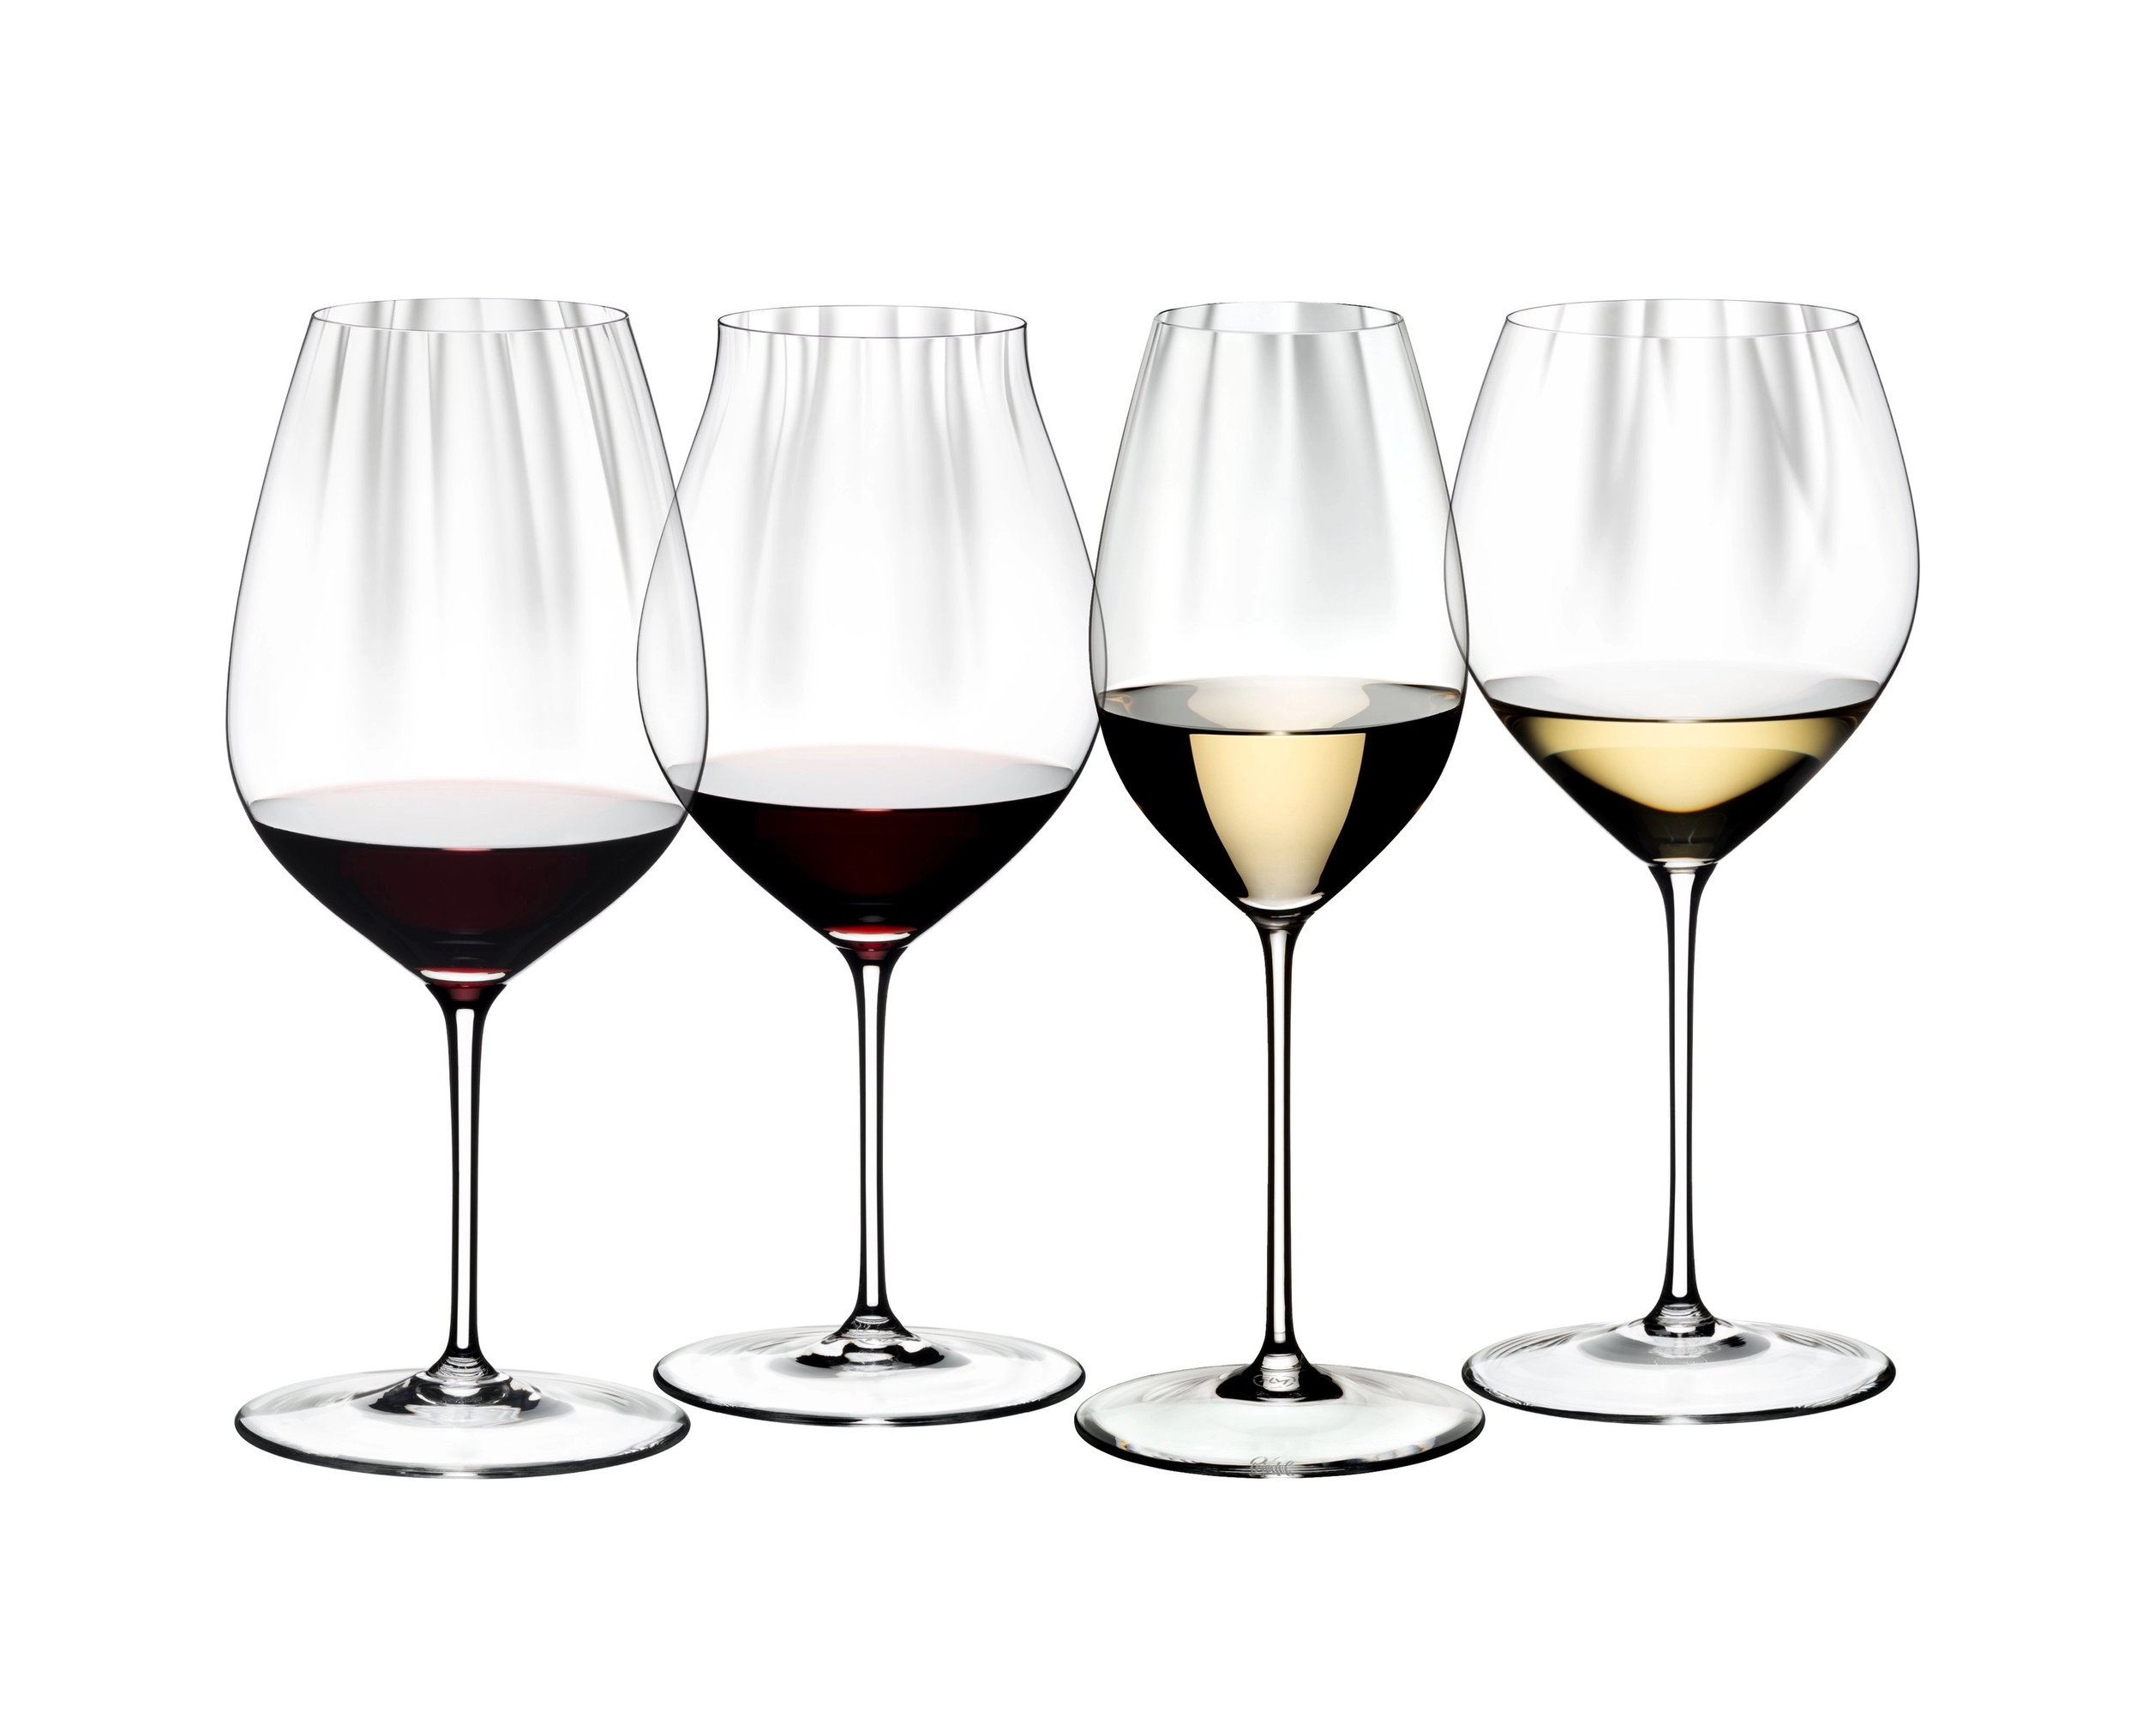 How to choose the best wine glasses